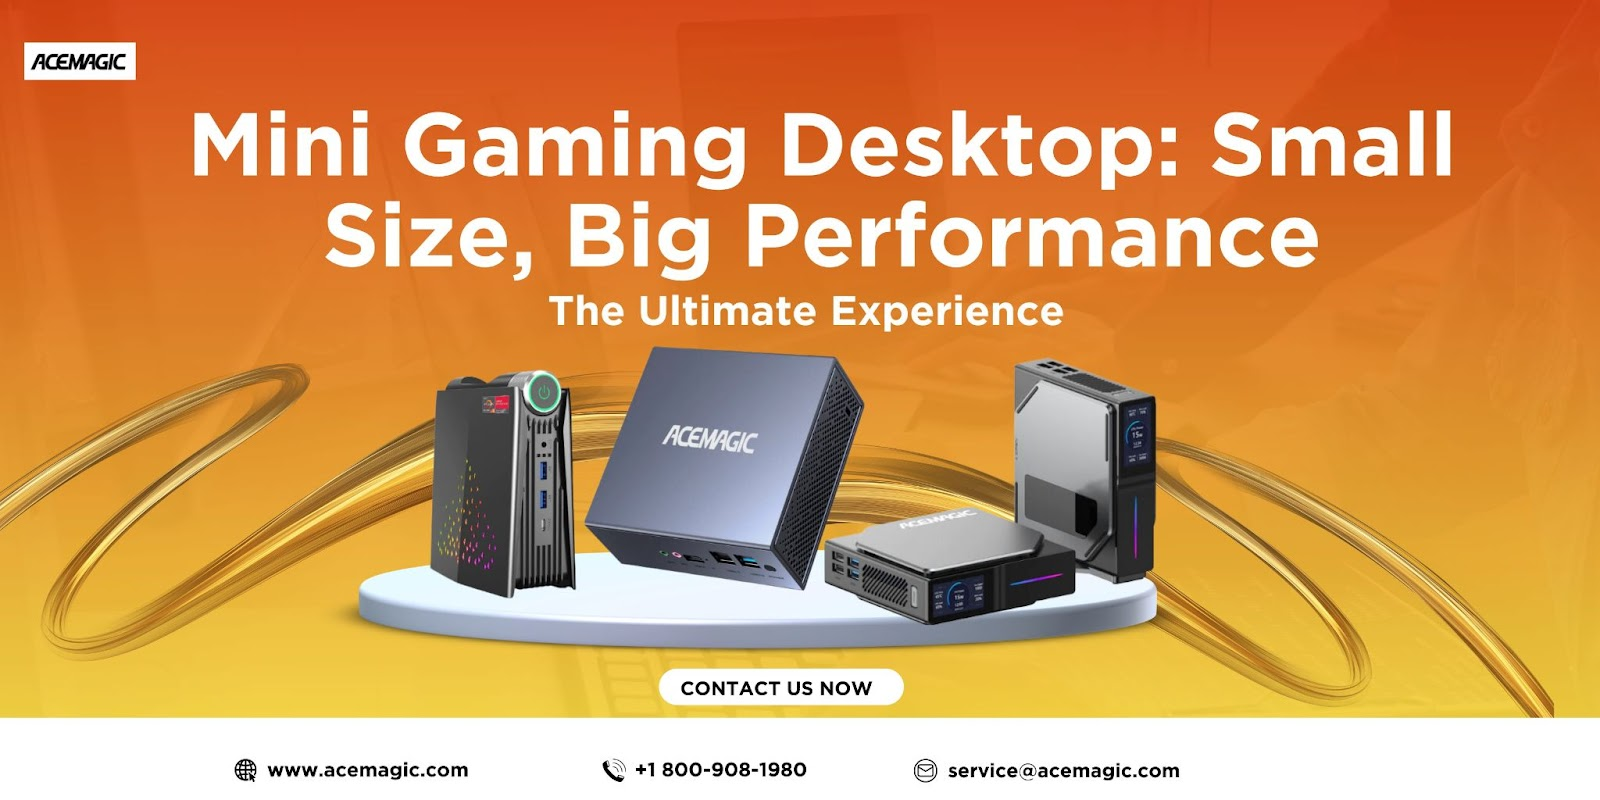 Mini Gaming Desktop: Small Size, Big Performance - The Ultimate Experience